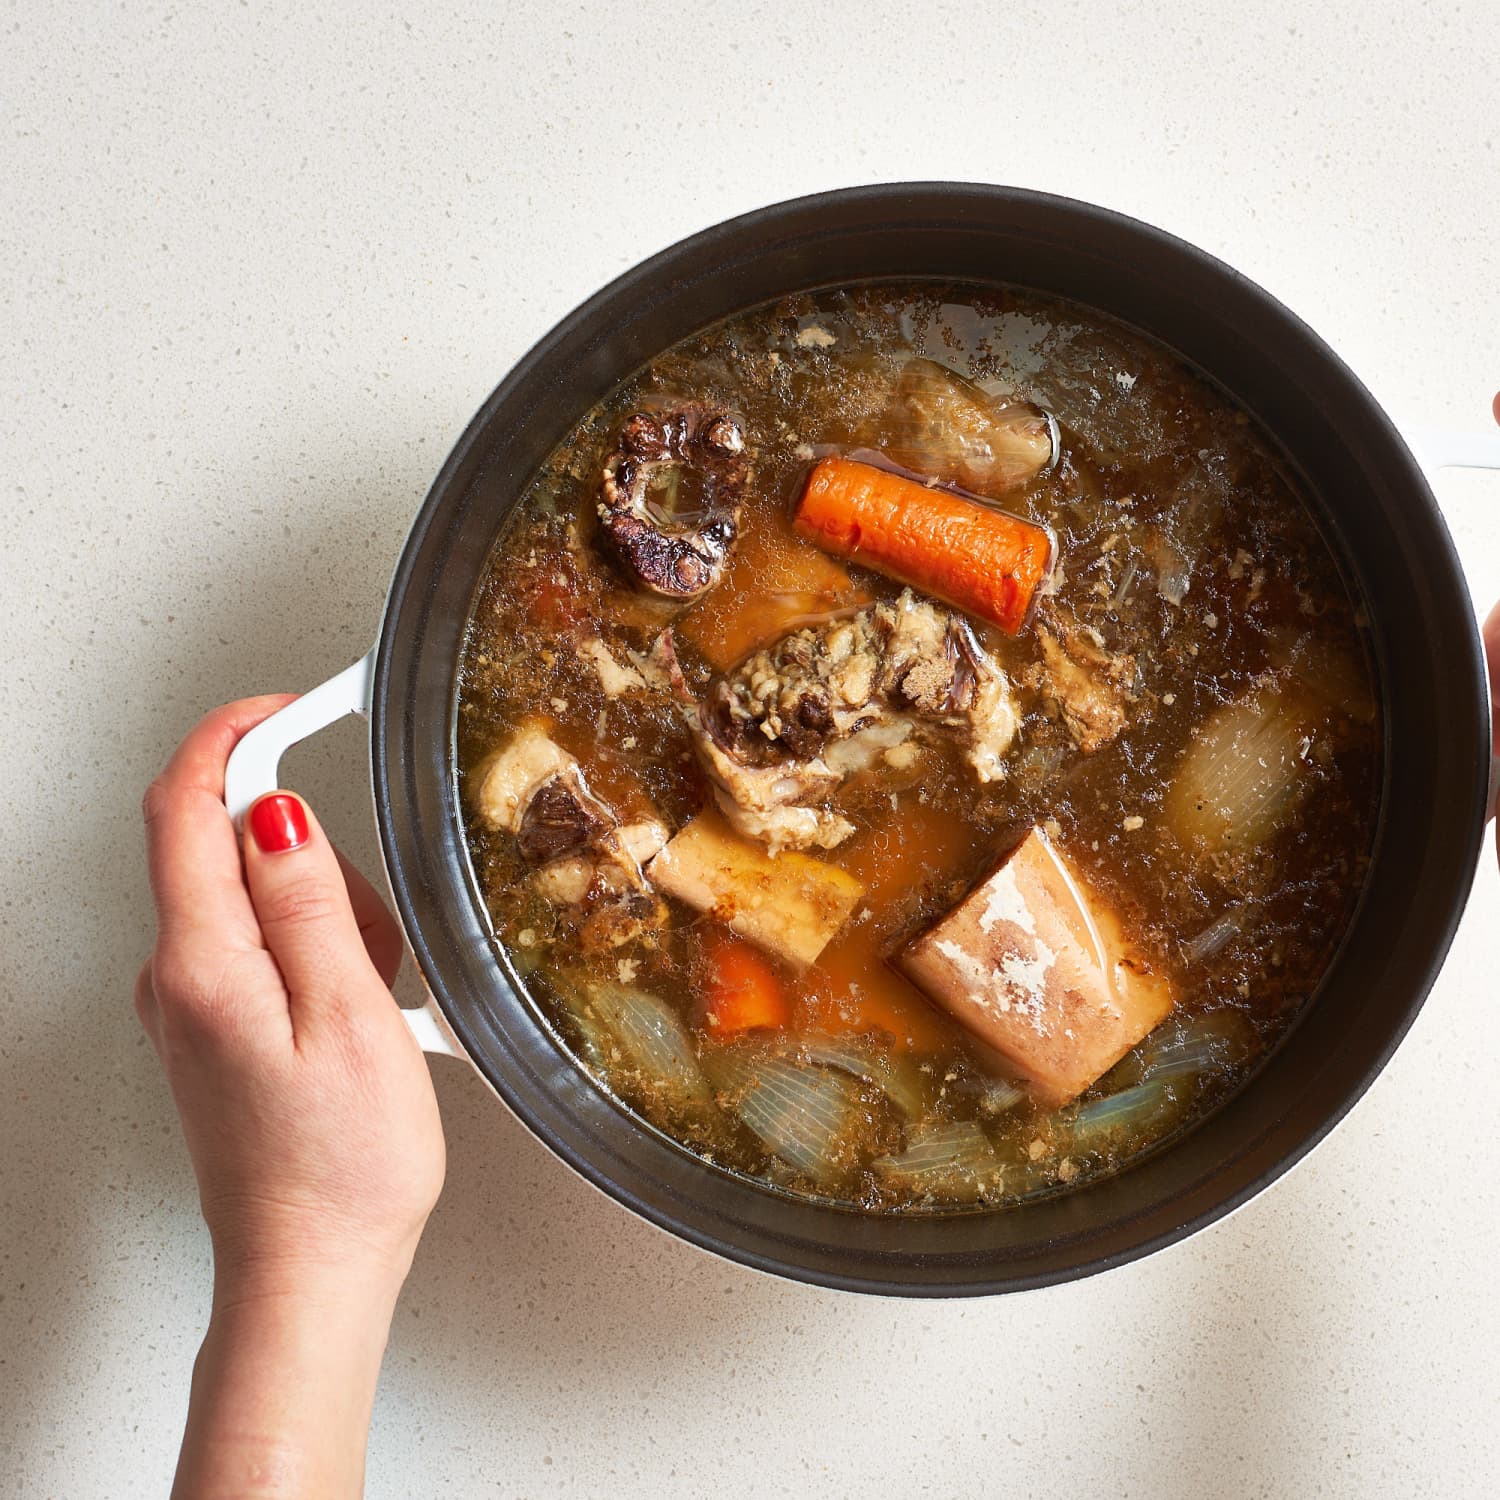 Bone Broth Recipe (On a Stovetop or In a Slow Cooker) | The Kitchn